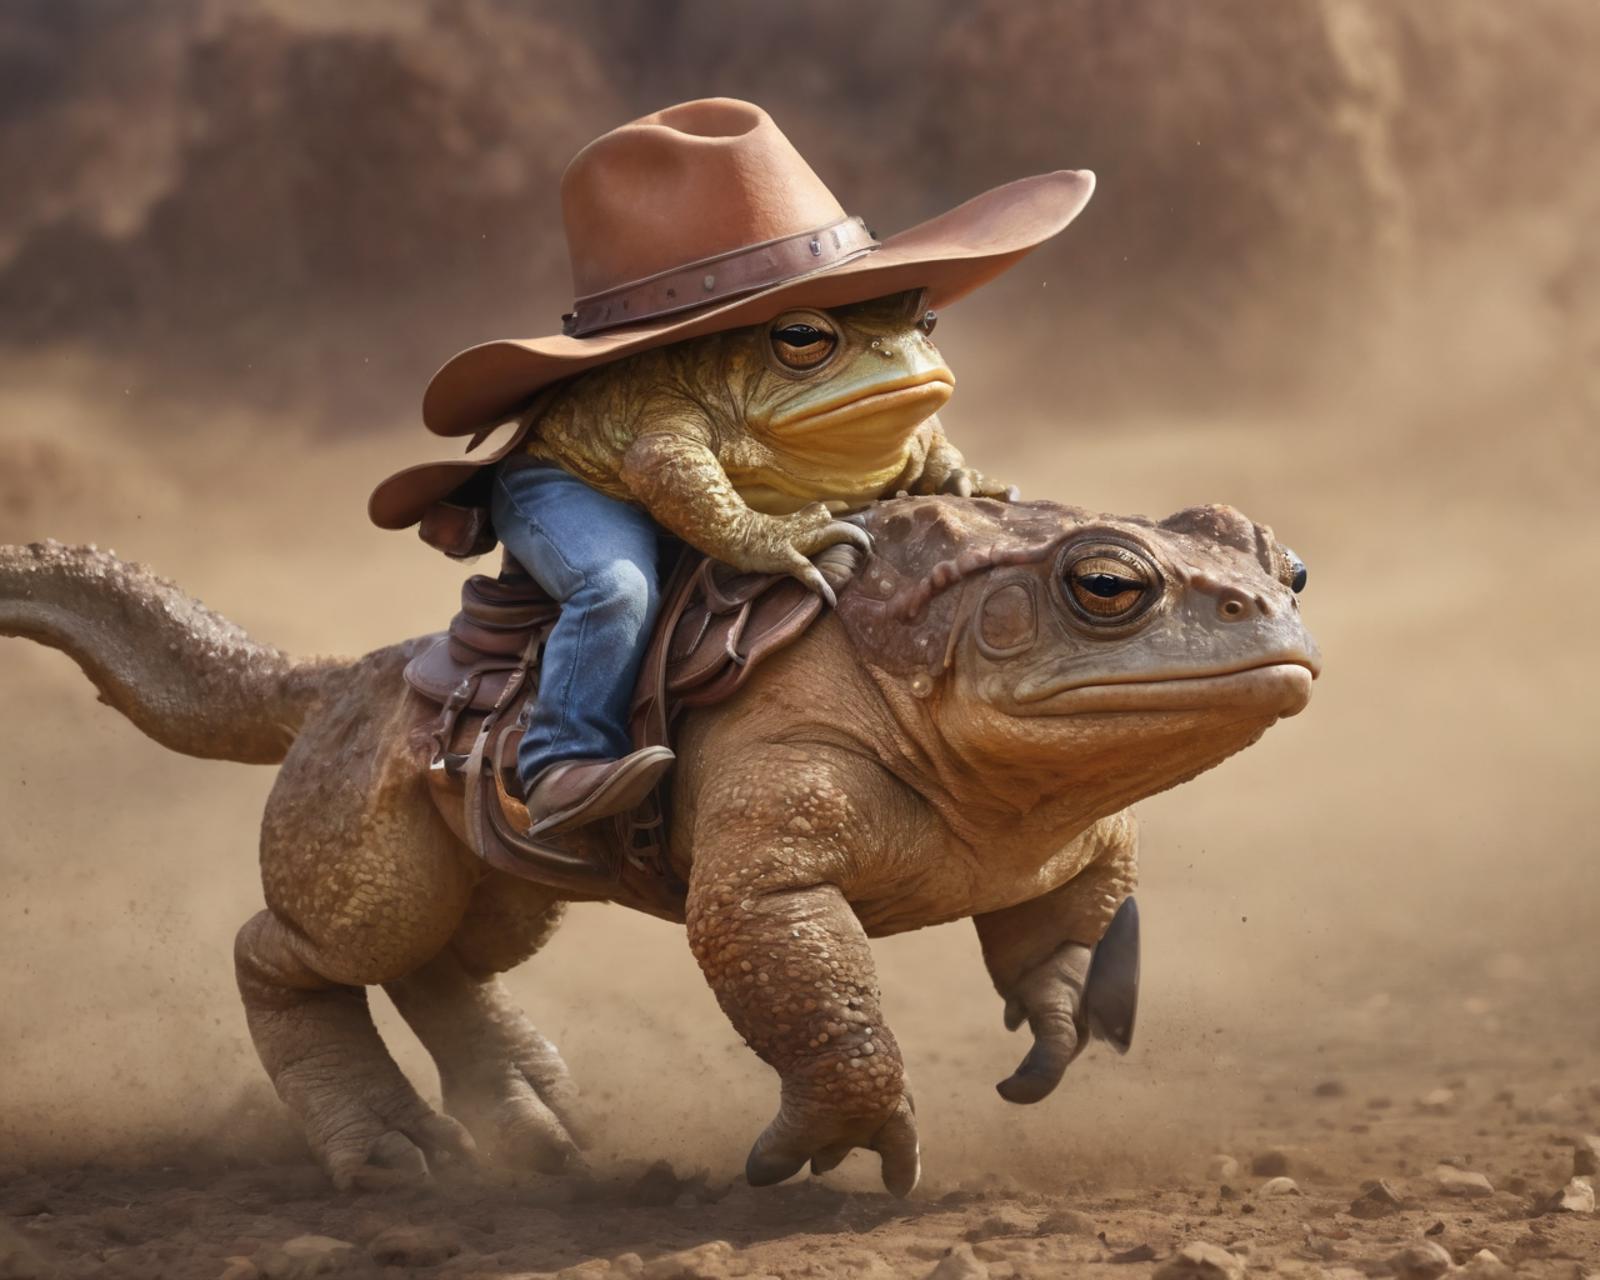 A frog riding on a lizard wearing a cowboy hat.